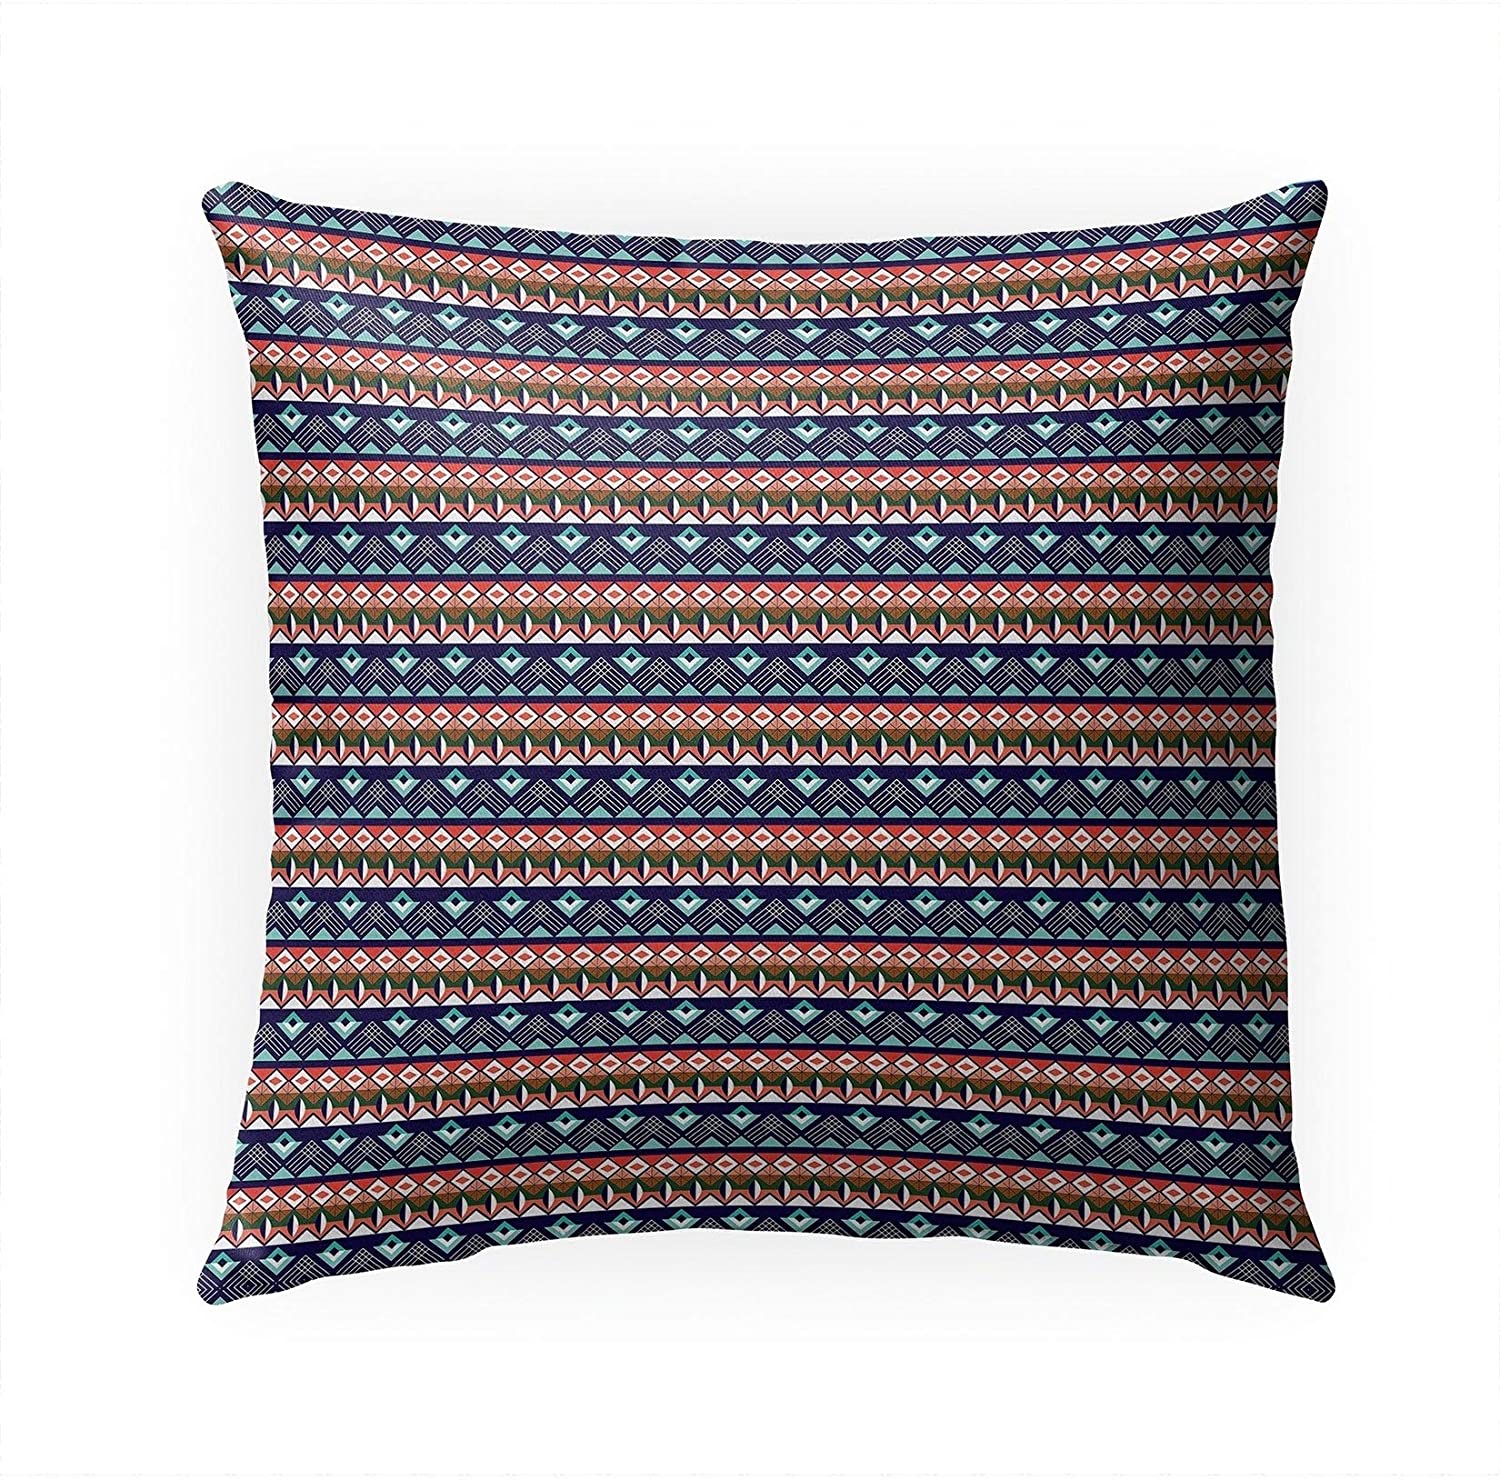 MISC Africa Lines Indoor|Outdoor Pillow by Chi Hey Lee 18x18 Red Geometric Bohemian Eclectic Polyester Removable Cover